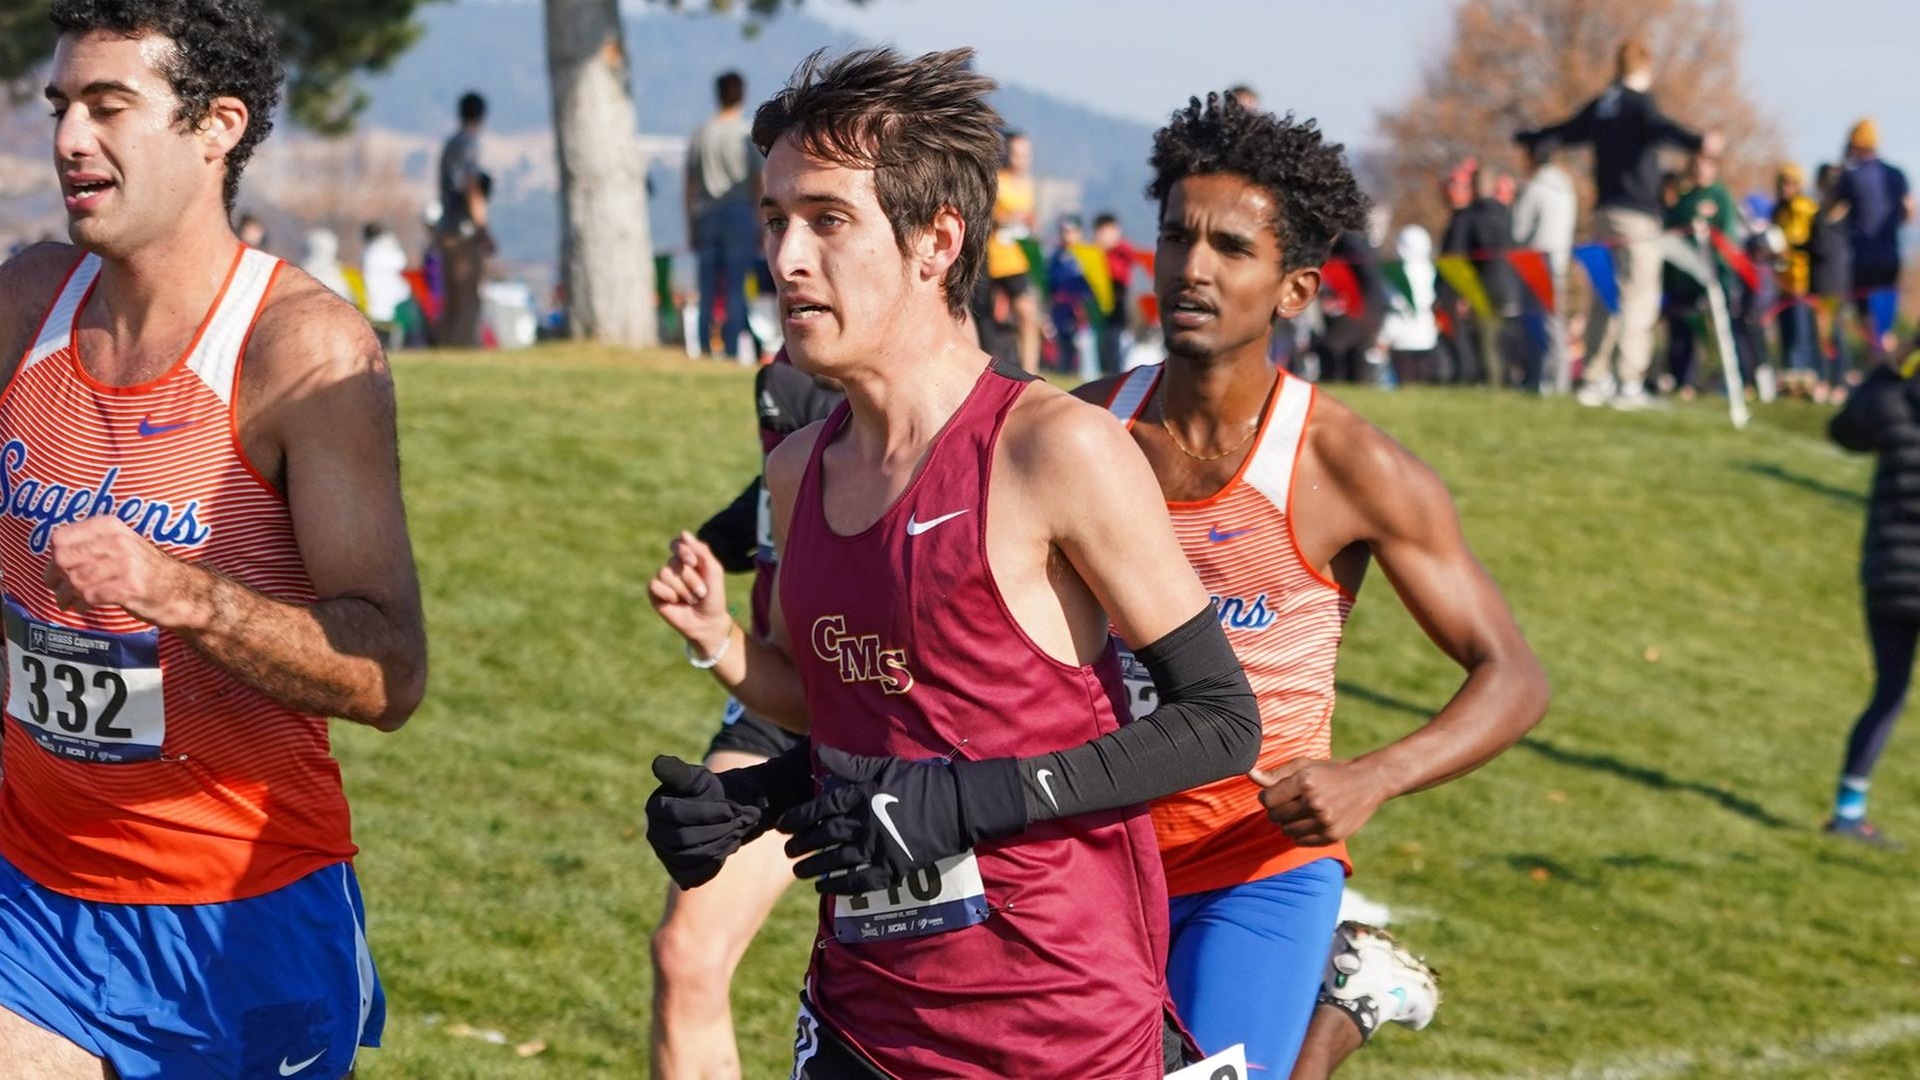 Adam Sage was top 10 in region and top 100 nationally (photo by Caleb Flegel)